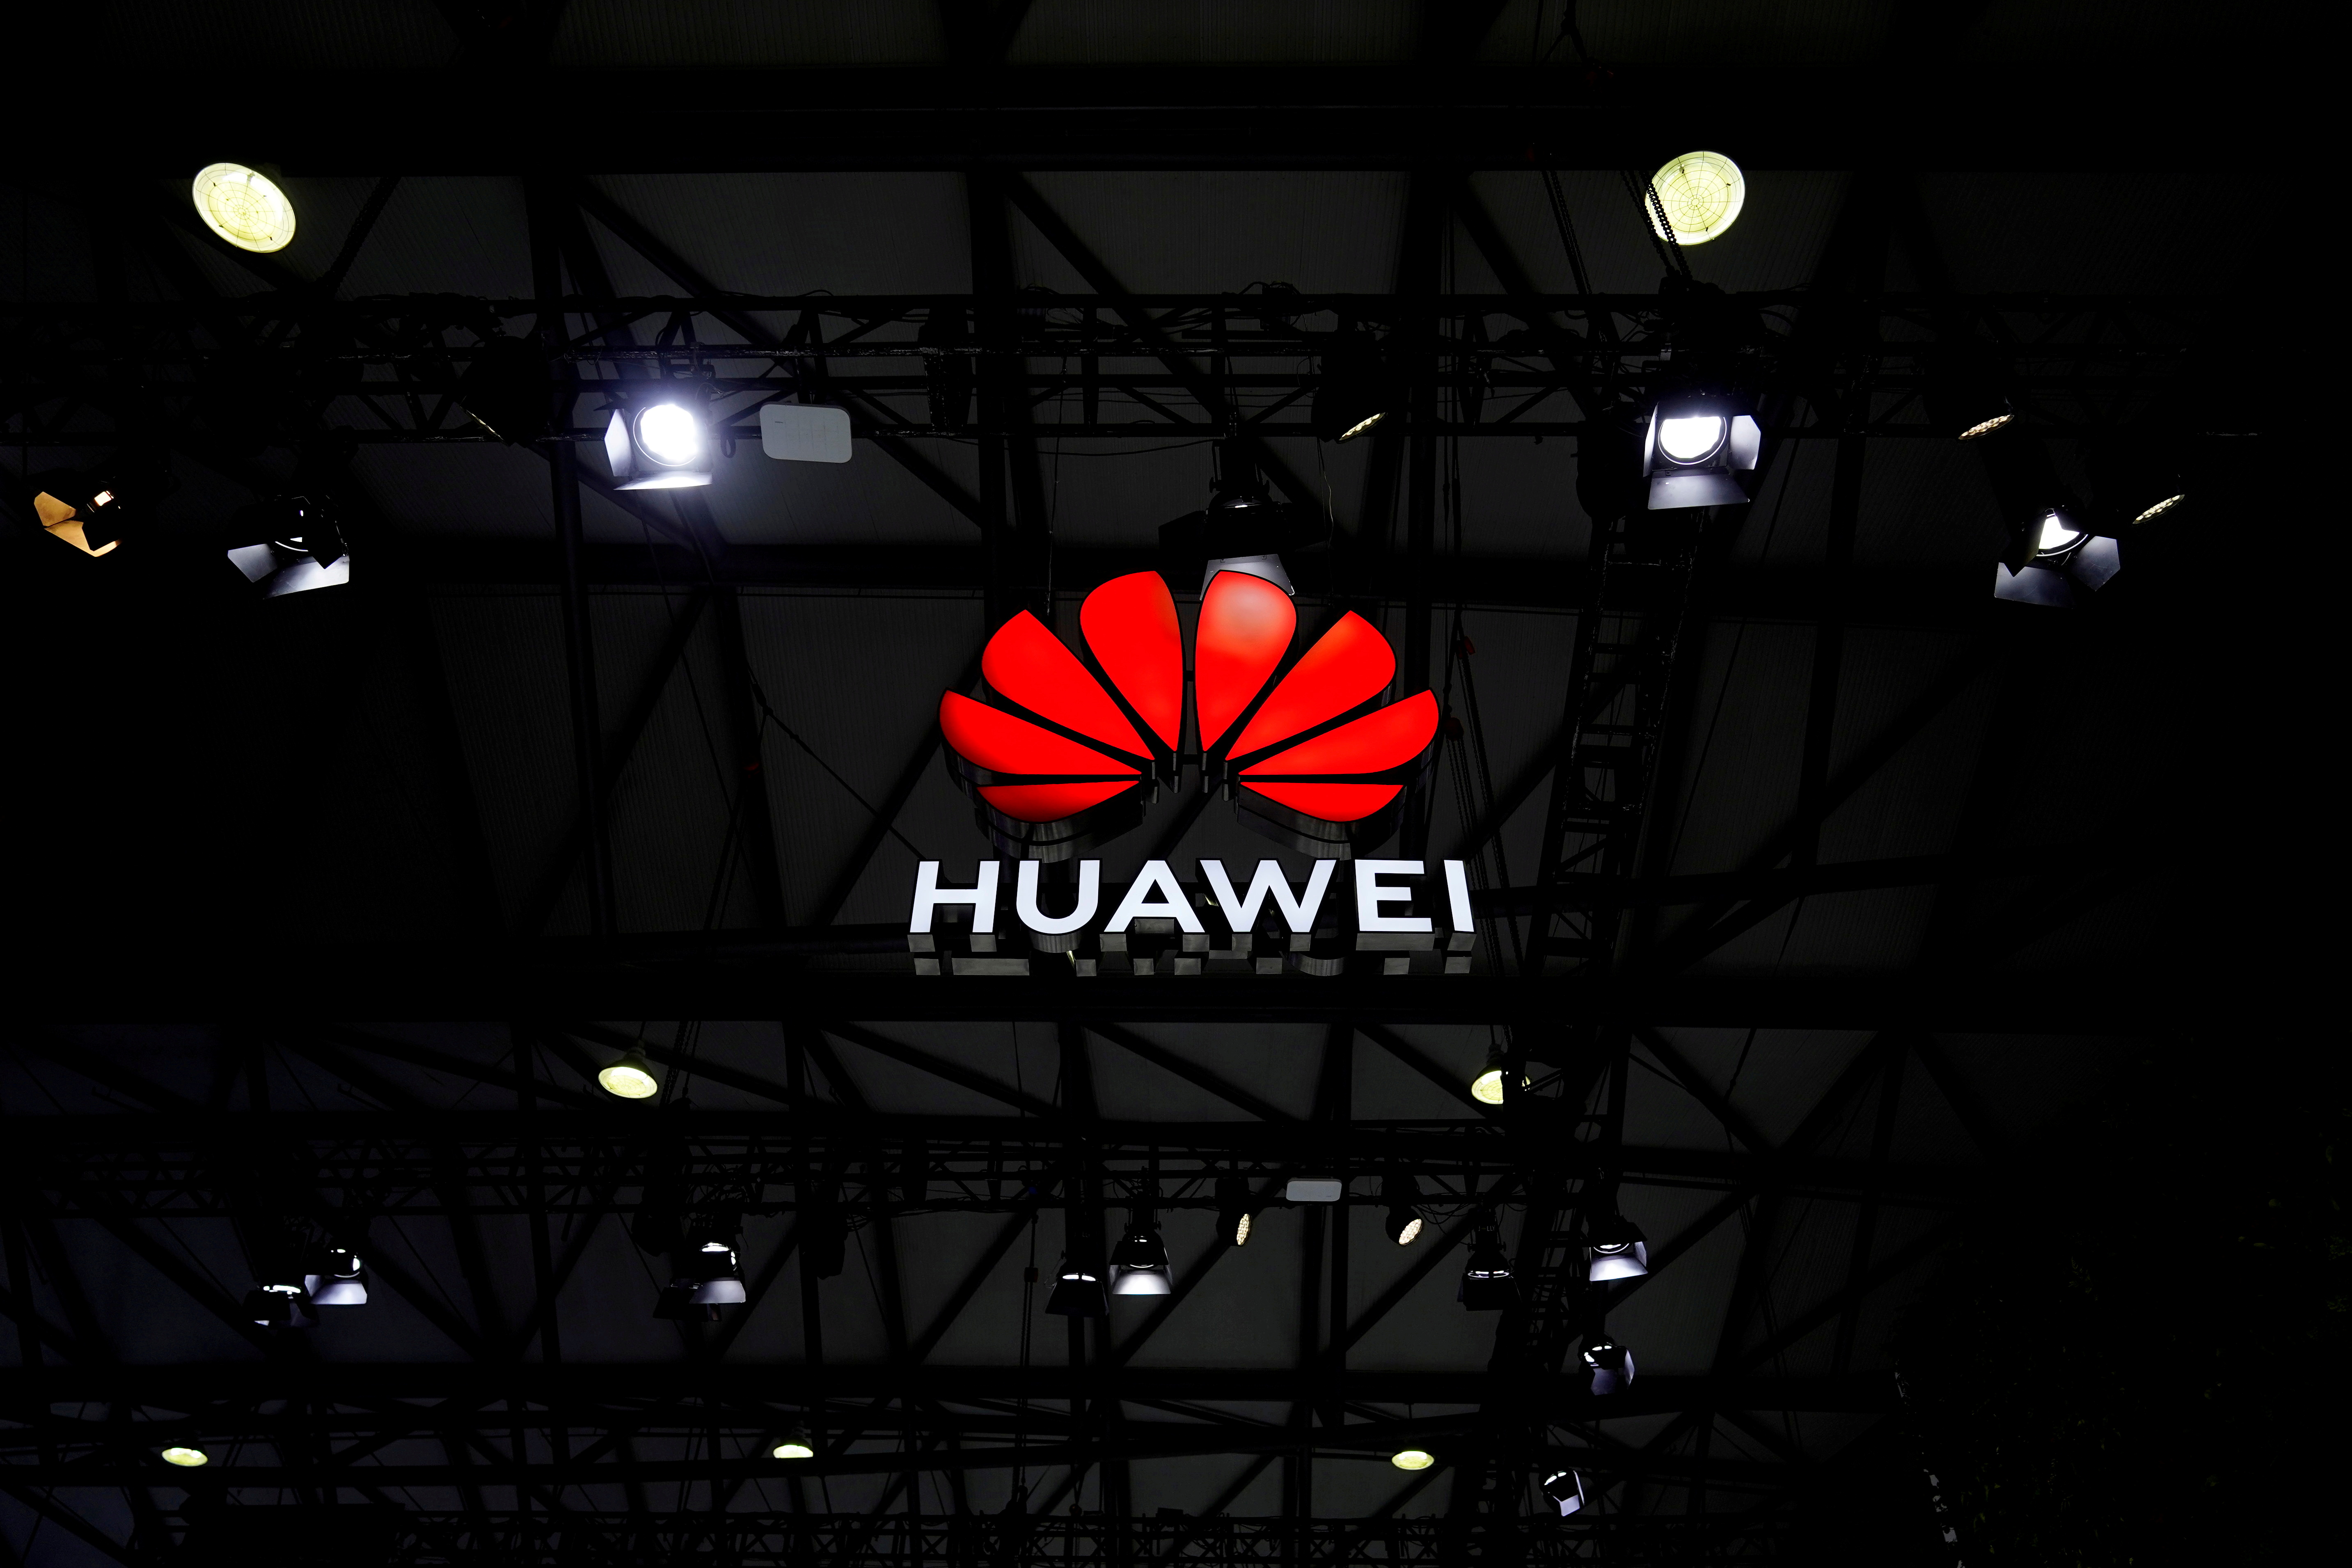 Senaat Aja vallei U.S. judge says Huawei has not violated court order, but warns company  lawyers | Reuters